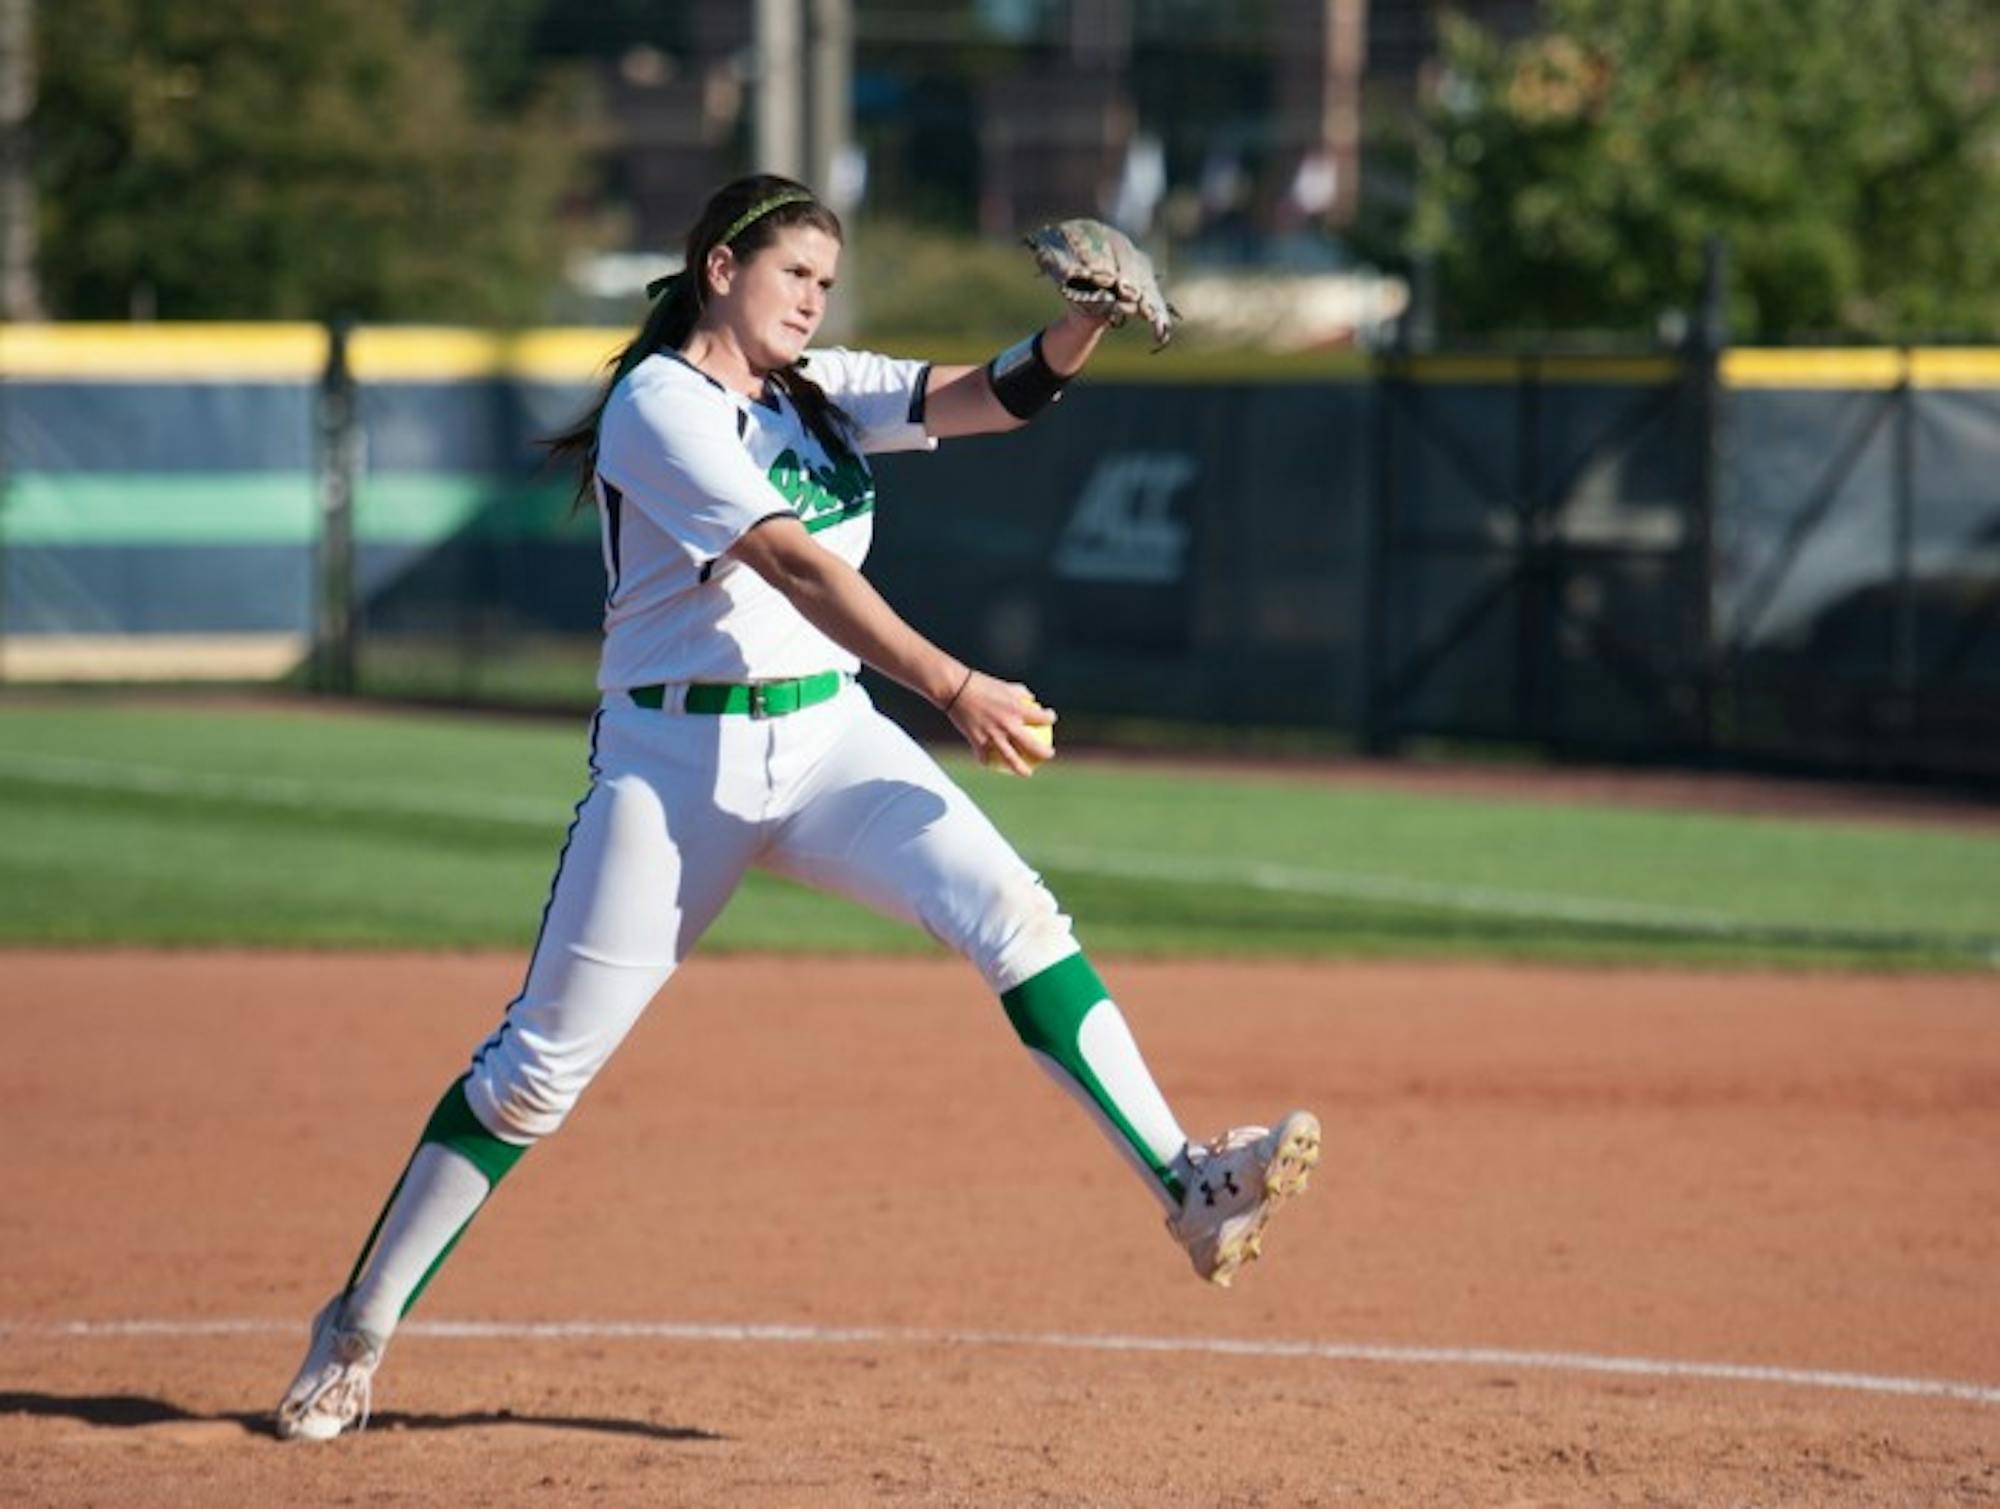 Irish senior pitcher Rachel Nasland tosses a pitch during Notre Dame’s exhibition game against Illinois State on Oct. 9.